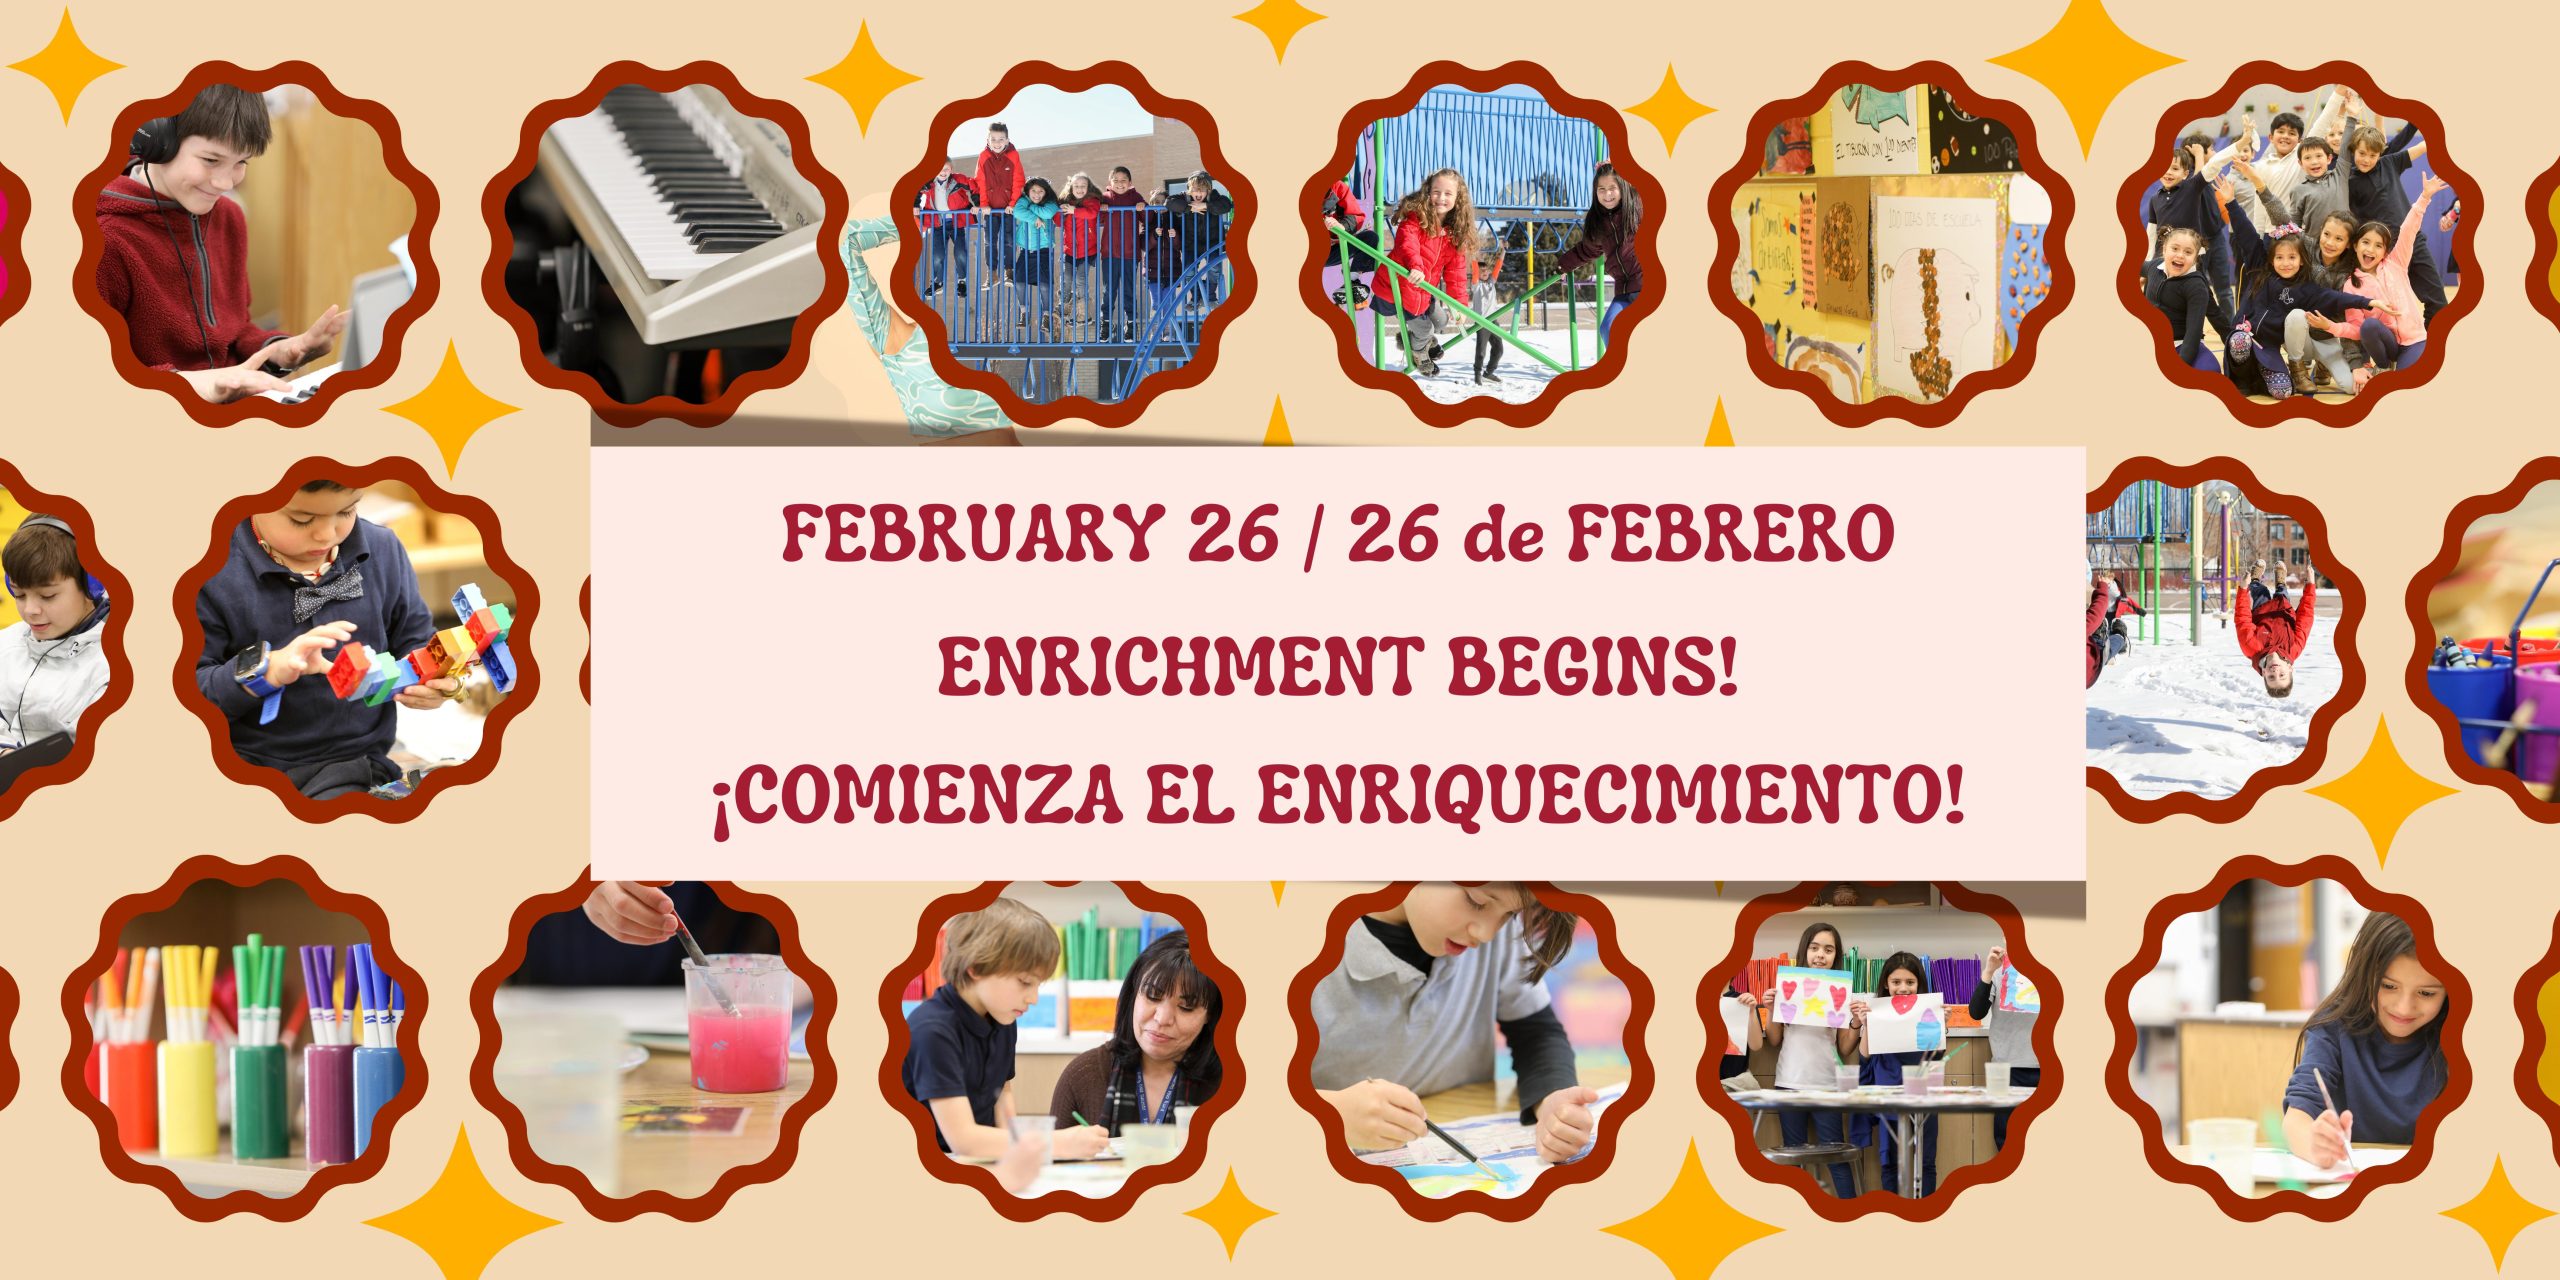 Red text says "February 26 / 26 de Febrero:" and "Enrichment Begins!" and "¡Comienza el Enriquecimiento!" on pale orange background. Images of students making art, playing on the playground, playing piano, playing with legos..